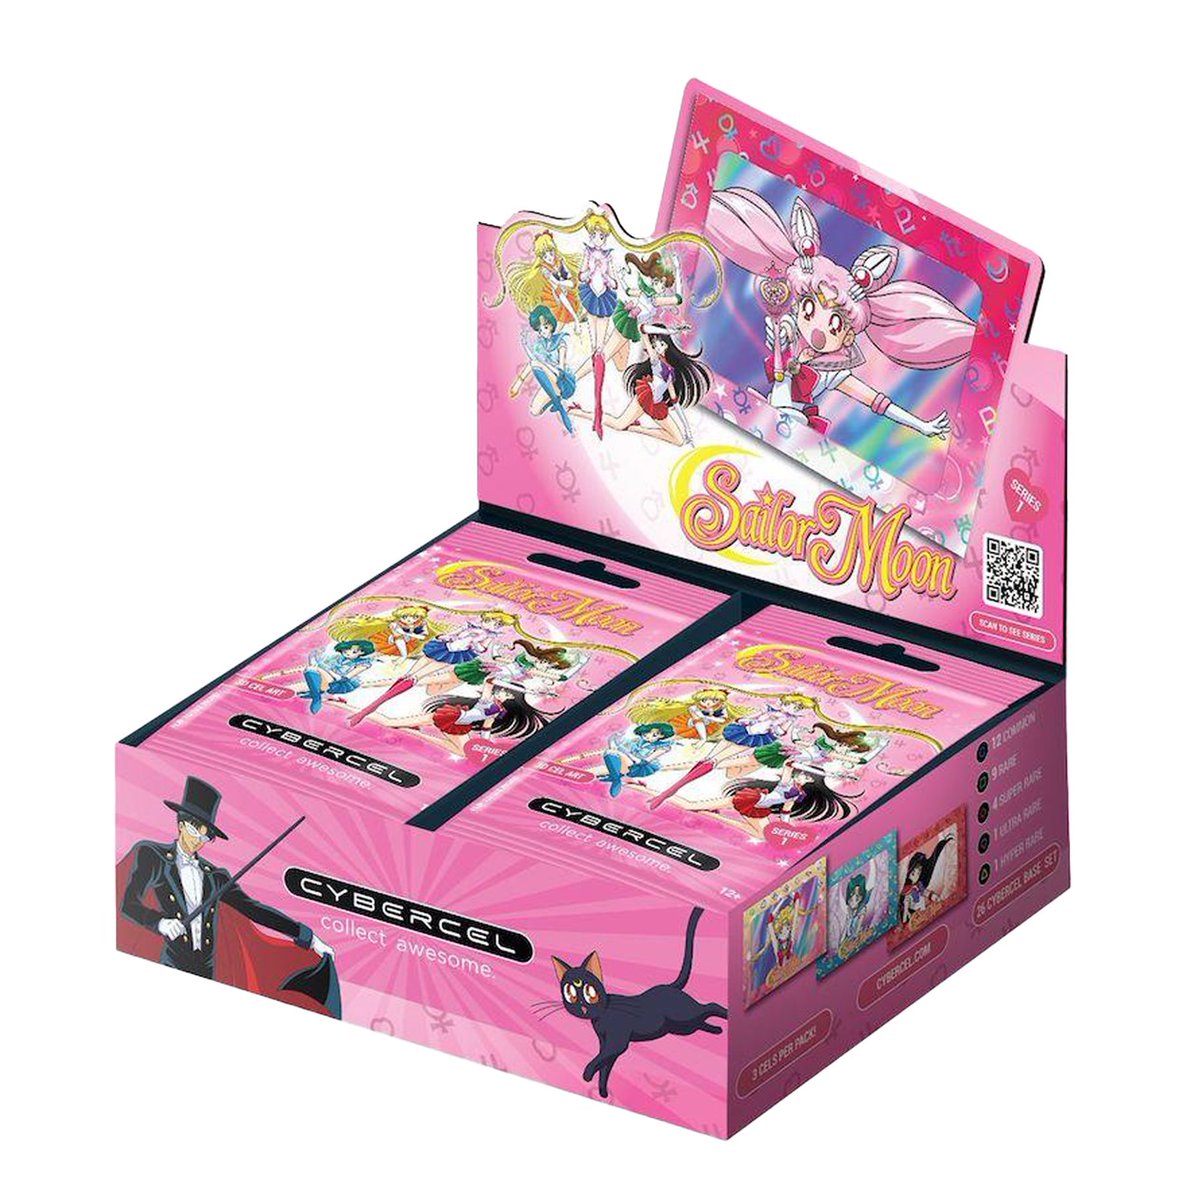 SAILOR MOON CARDS ARE COMING

We got images of the Sailor Moon CyberCel SERIES 1 collectible card set coming later this year.

sailormoonfannetwork.com/blog/cybercel-…